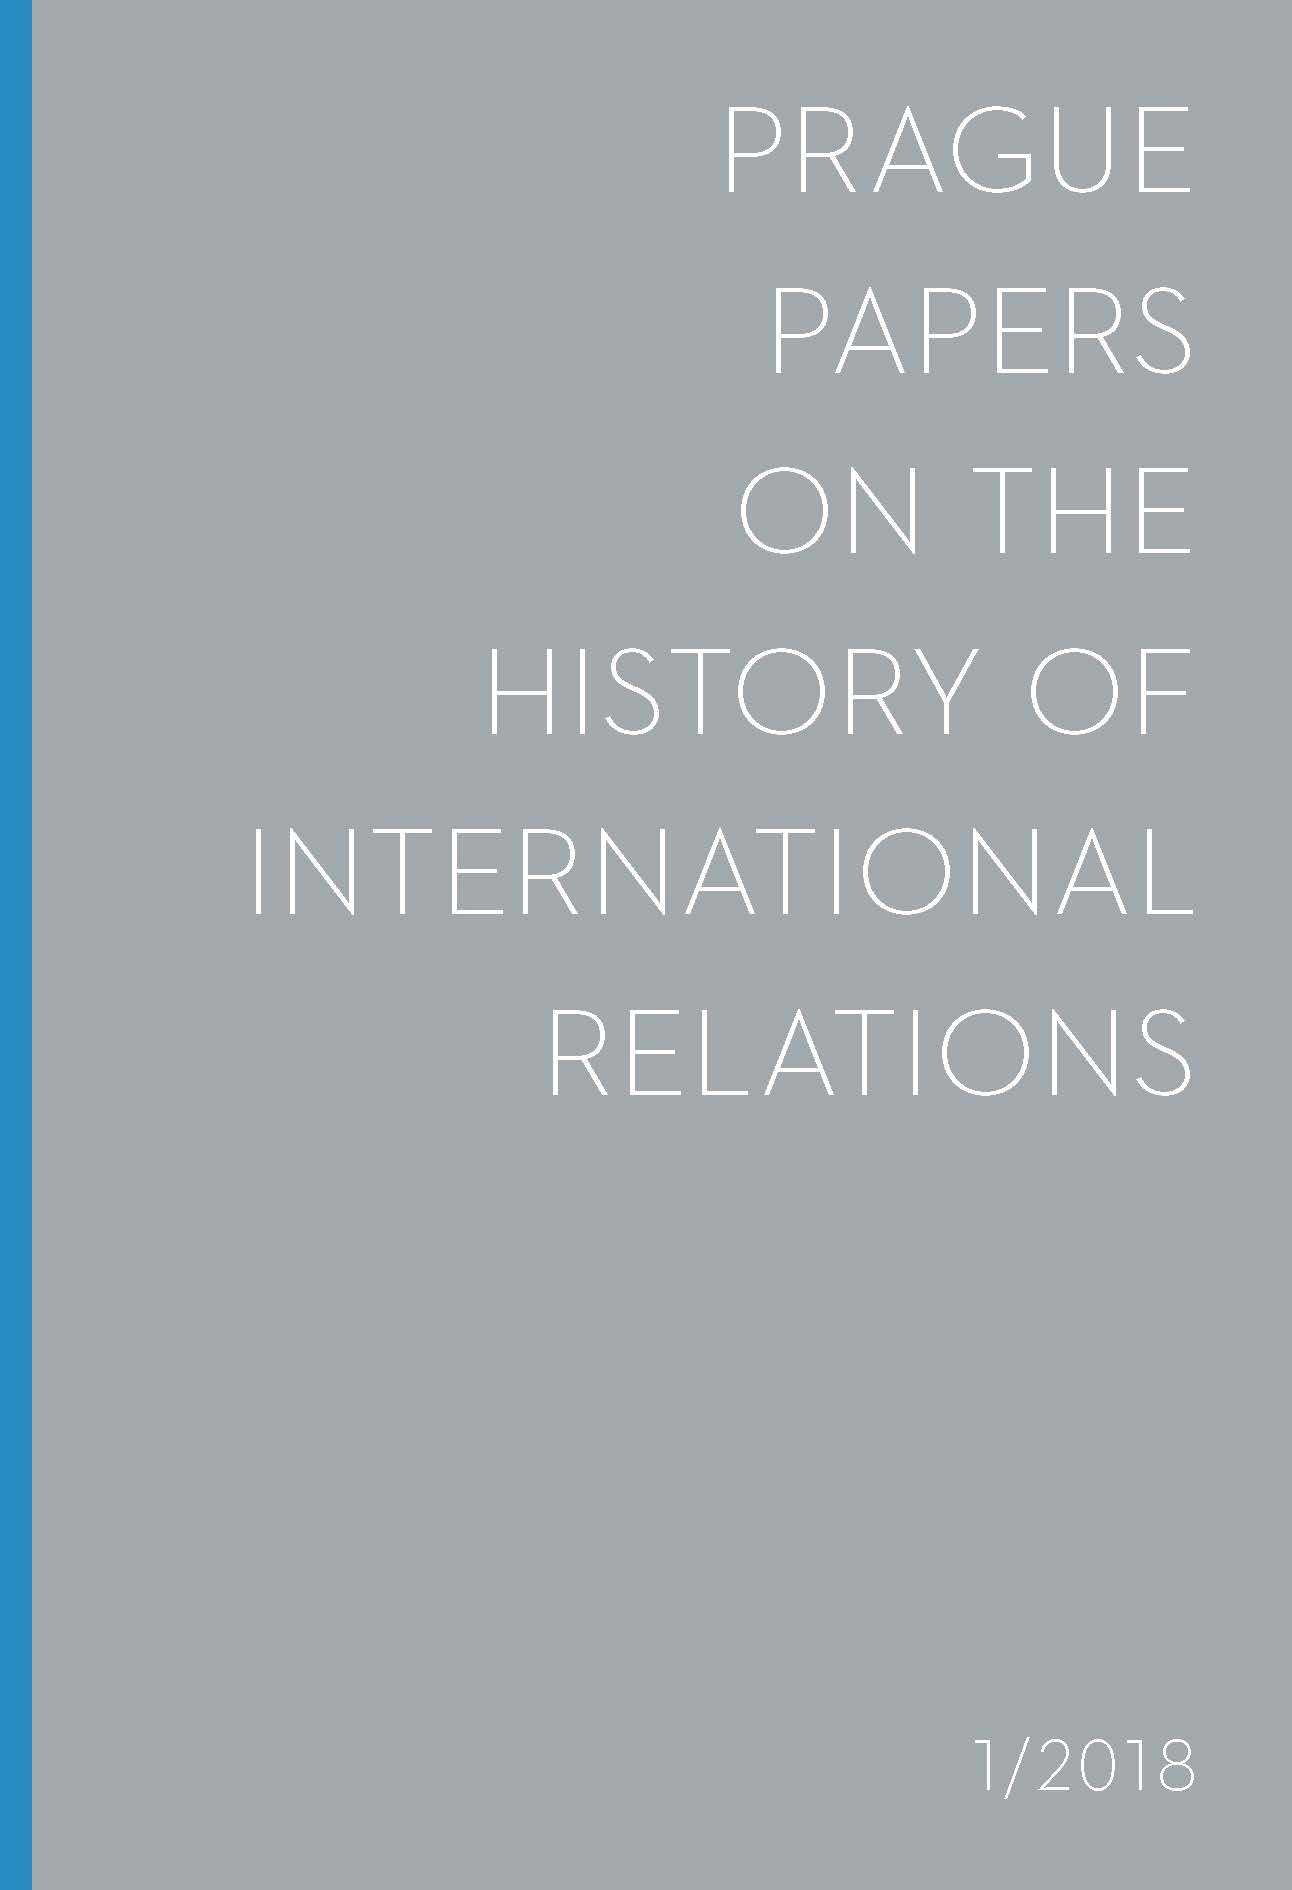 Prague Papers on the History of International Relations